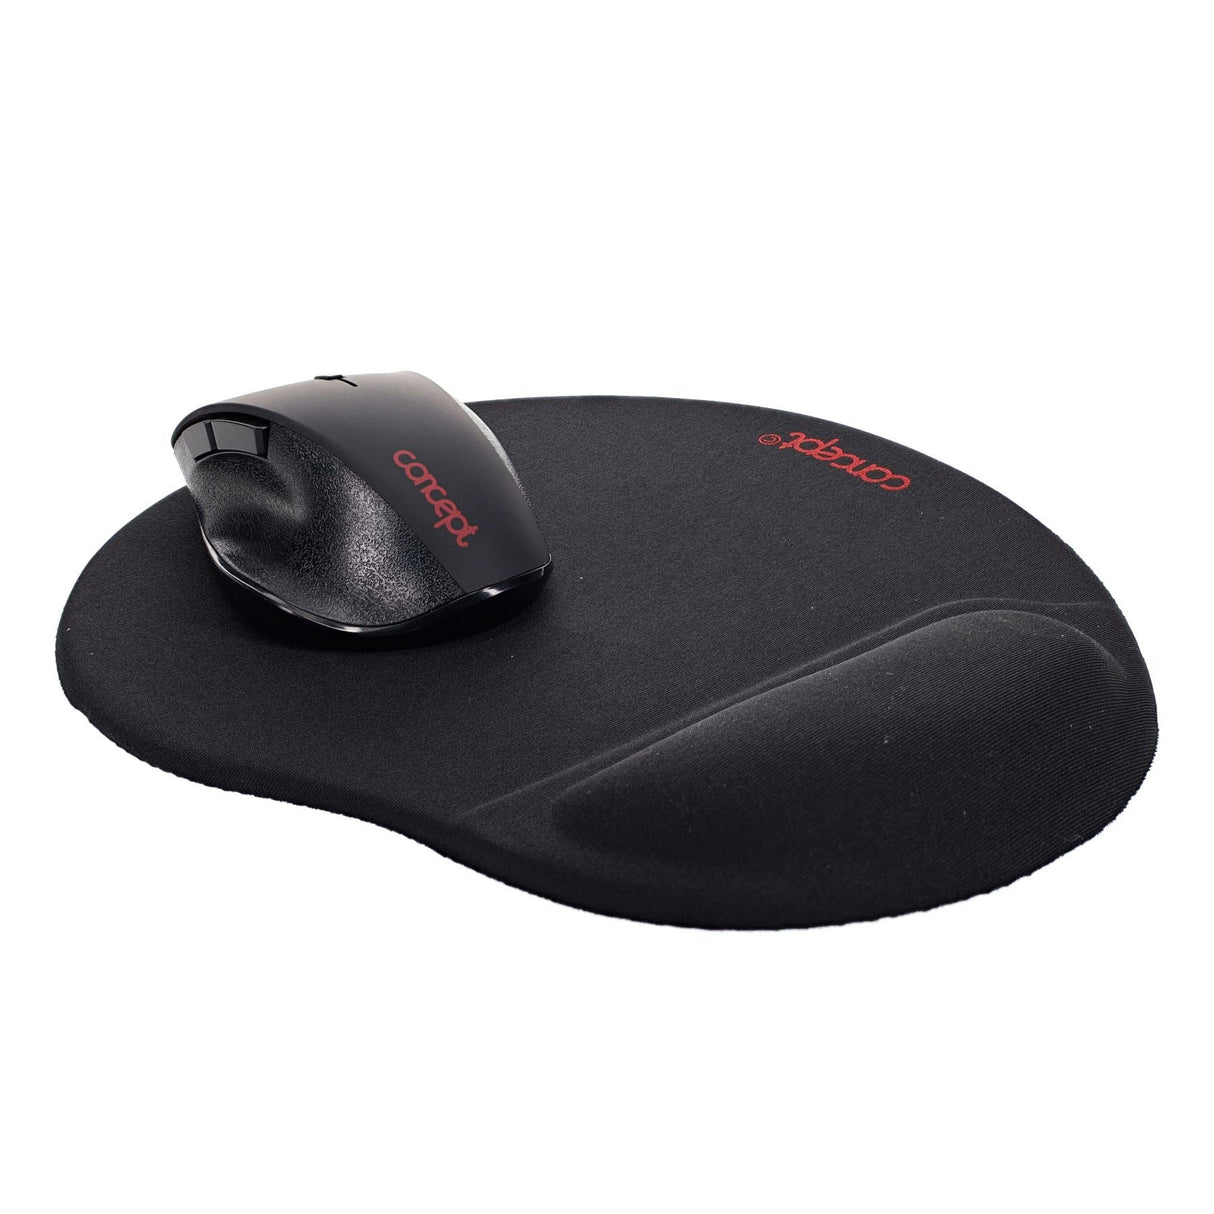 Concept Mouse Pad | Stationery Shop UK